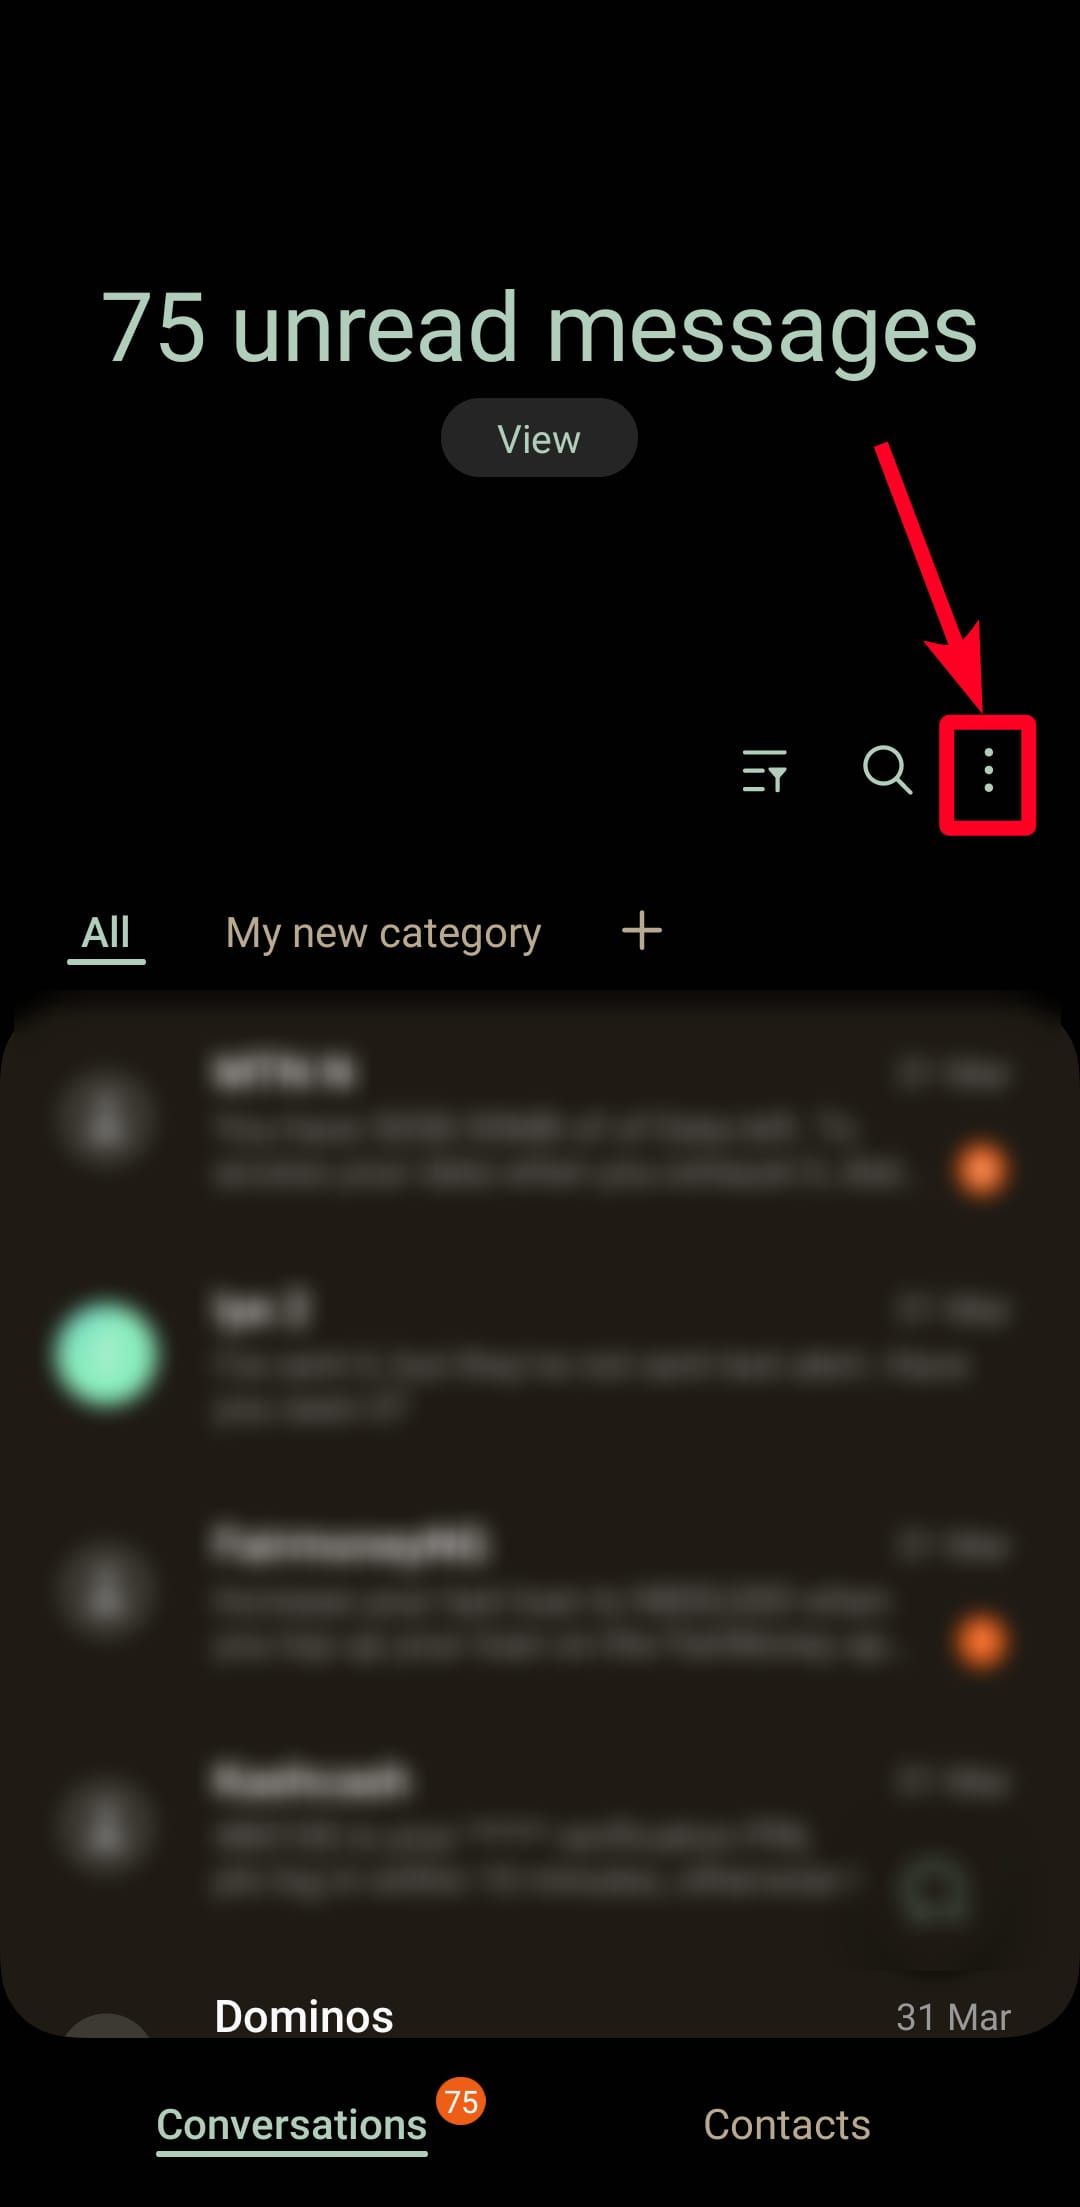 The Samsung Messages app main screen with a red arrow pointing to the three dots menu